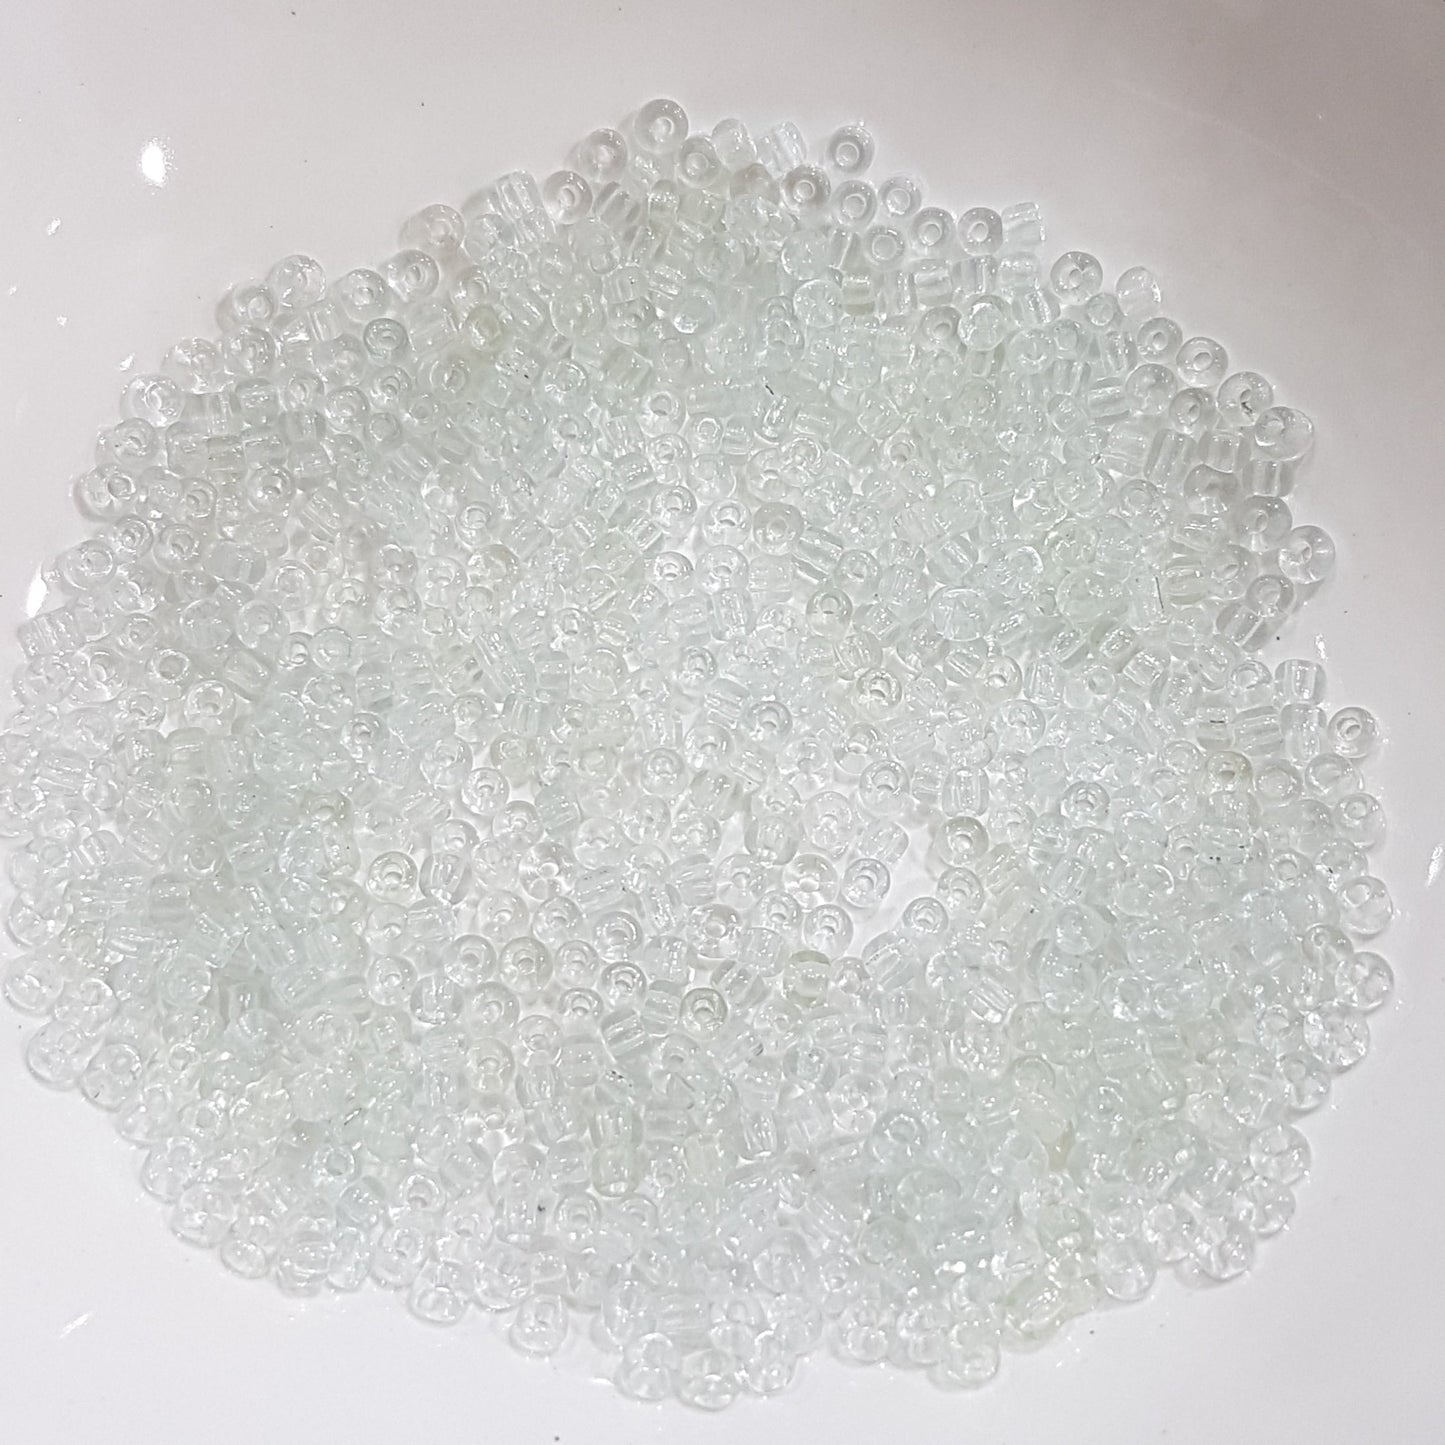 15g 2mm Transparent Glass Seed Beads